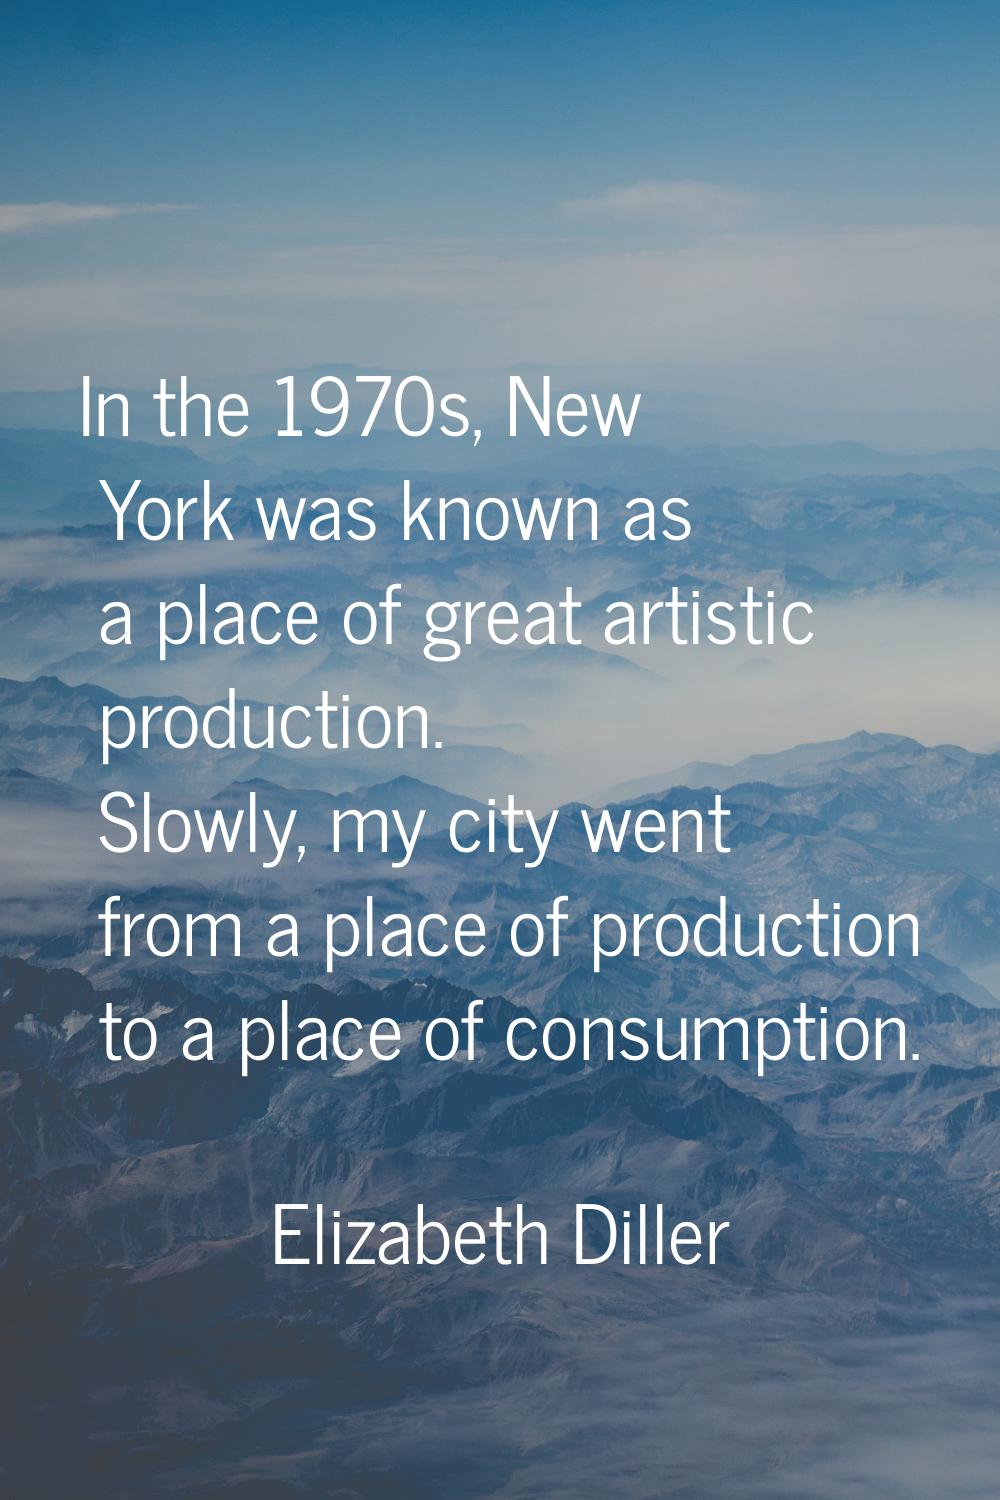 In the 1970s, New York was known as a place of great artistic production. Slowly, my city went from